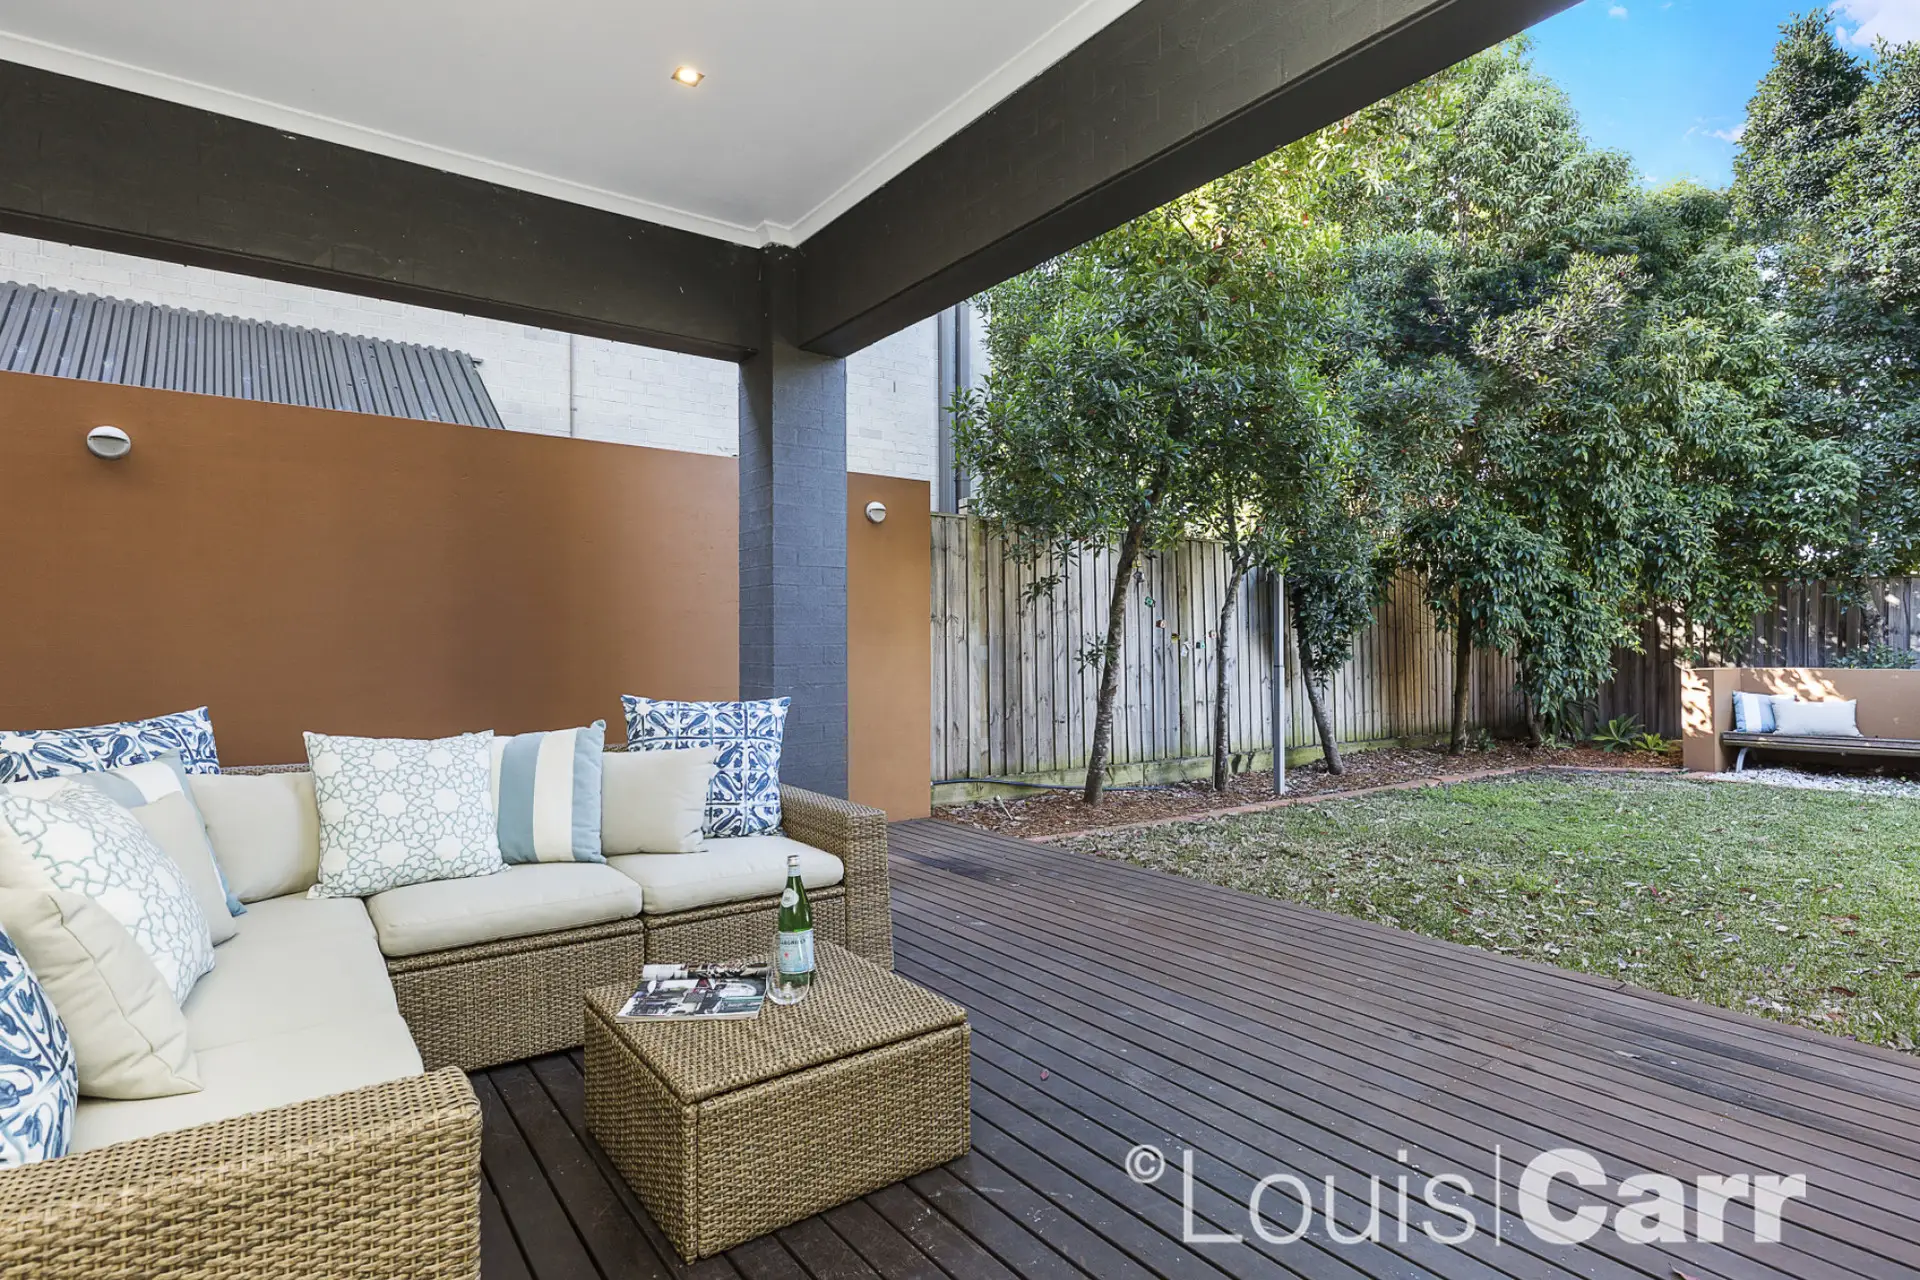 Photo #8: 15 Bellcast Road, Rouse Hill - Sold by Louis Carr Real Estate